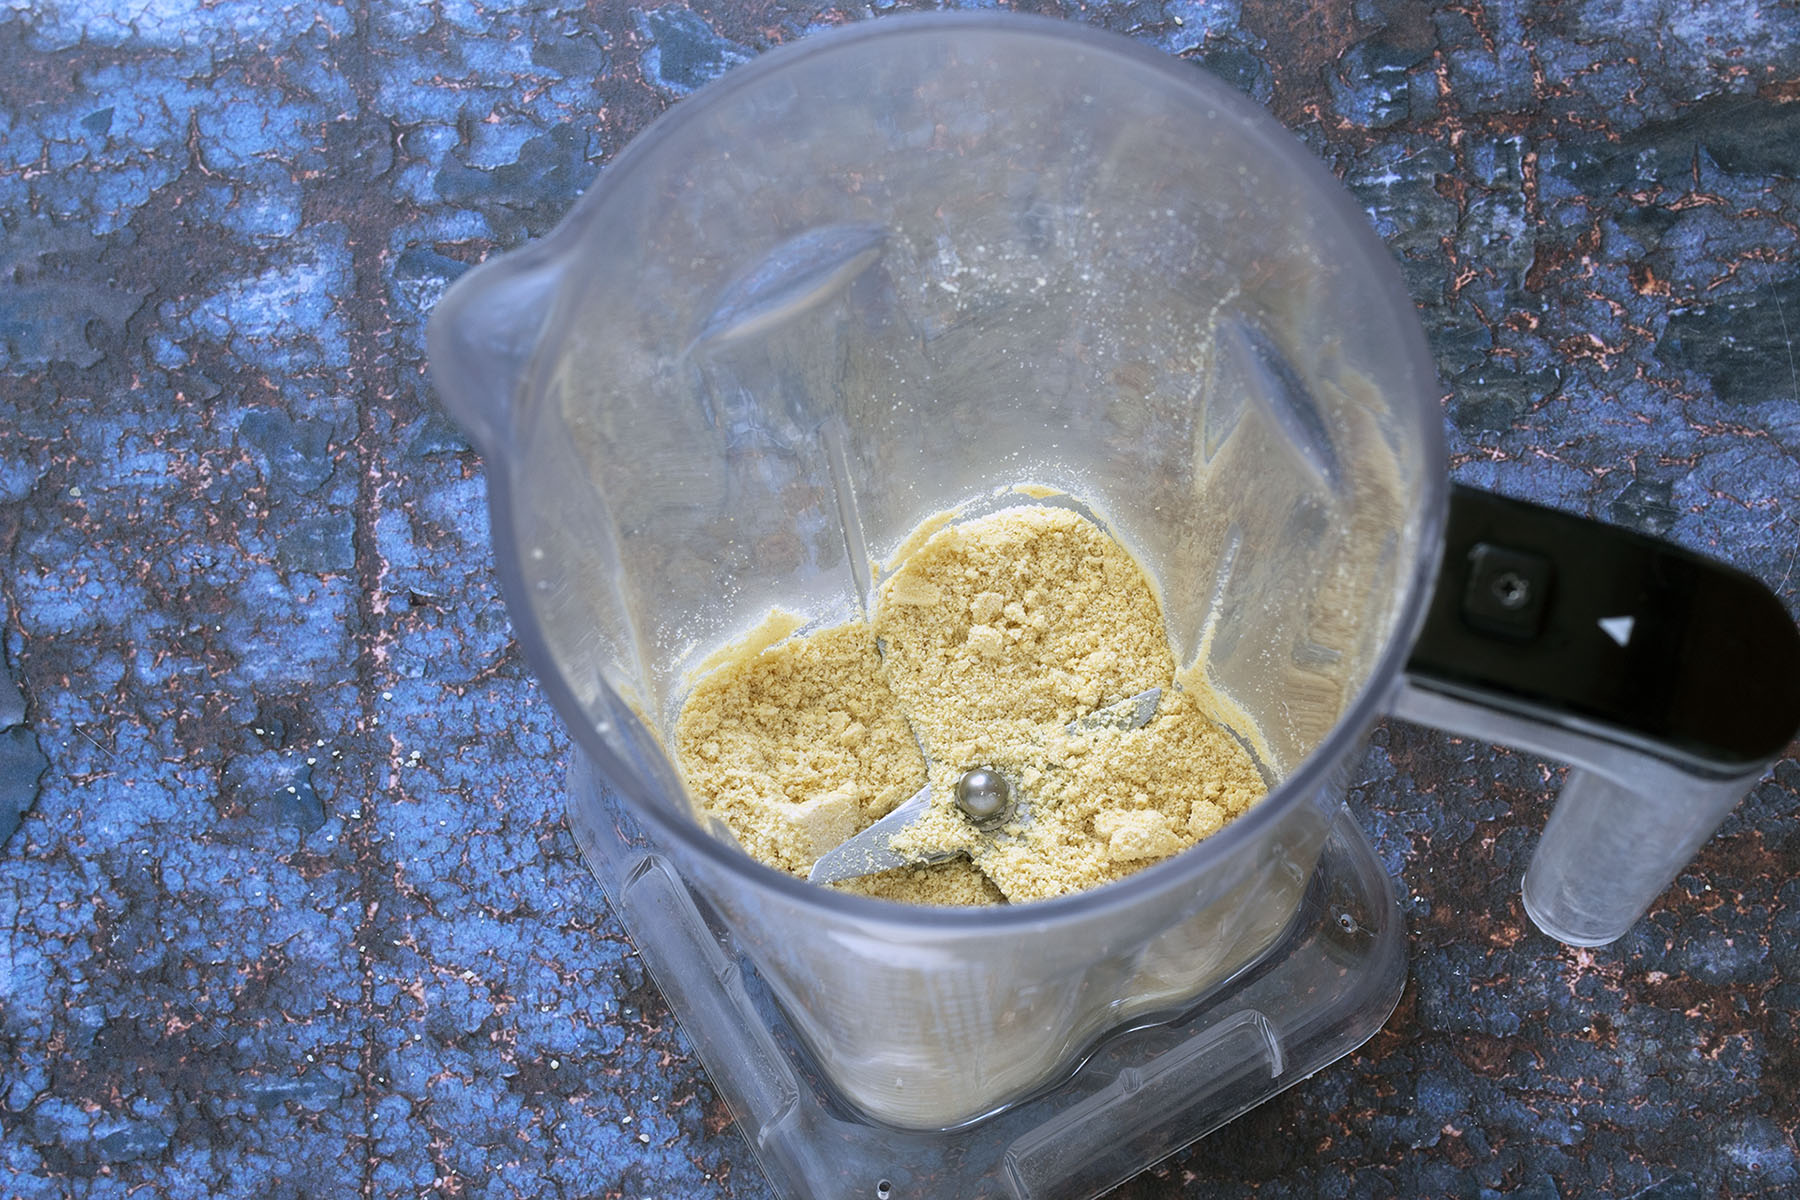 vegan parmesan cheese made with almonds in blender